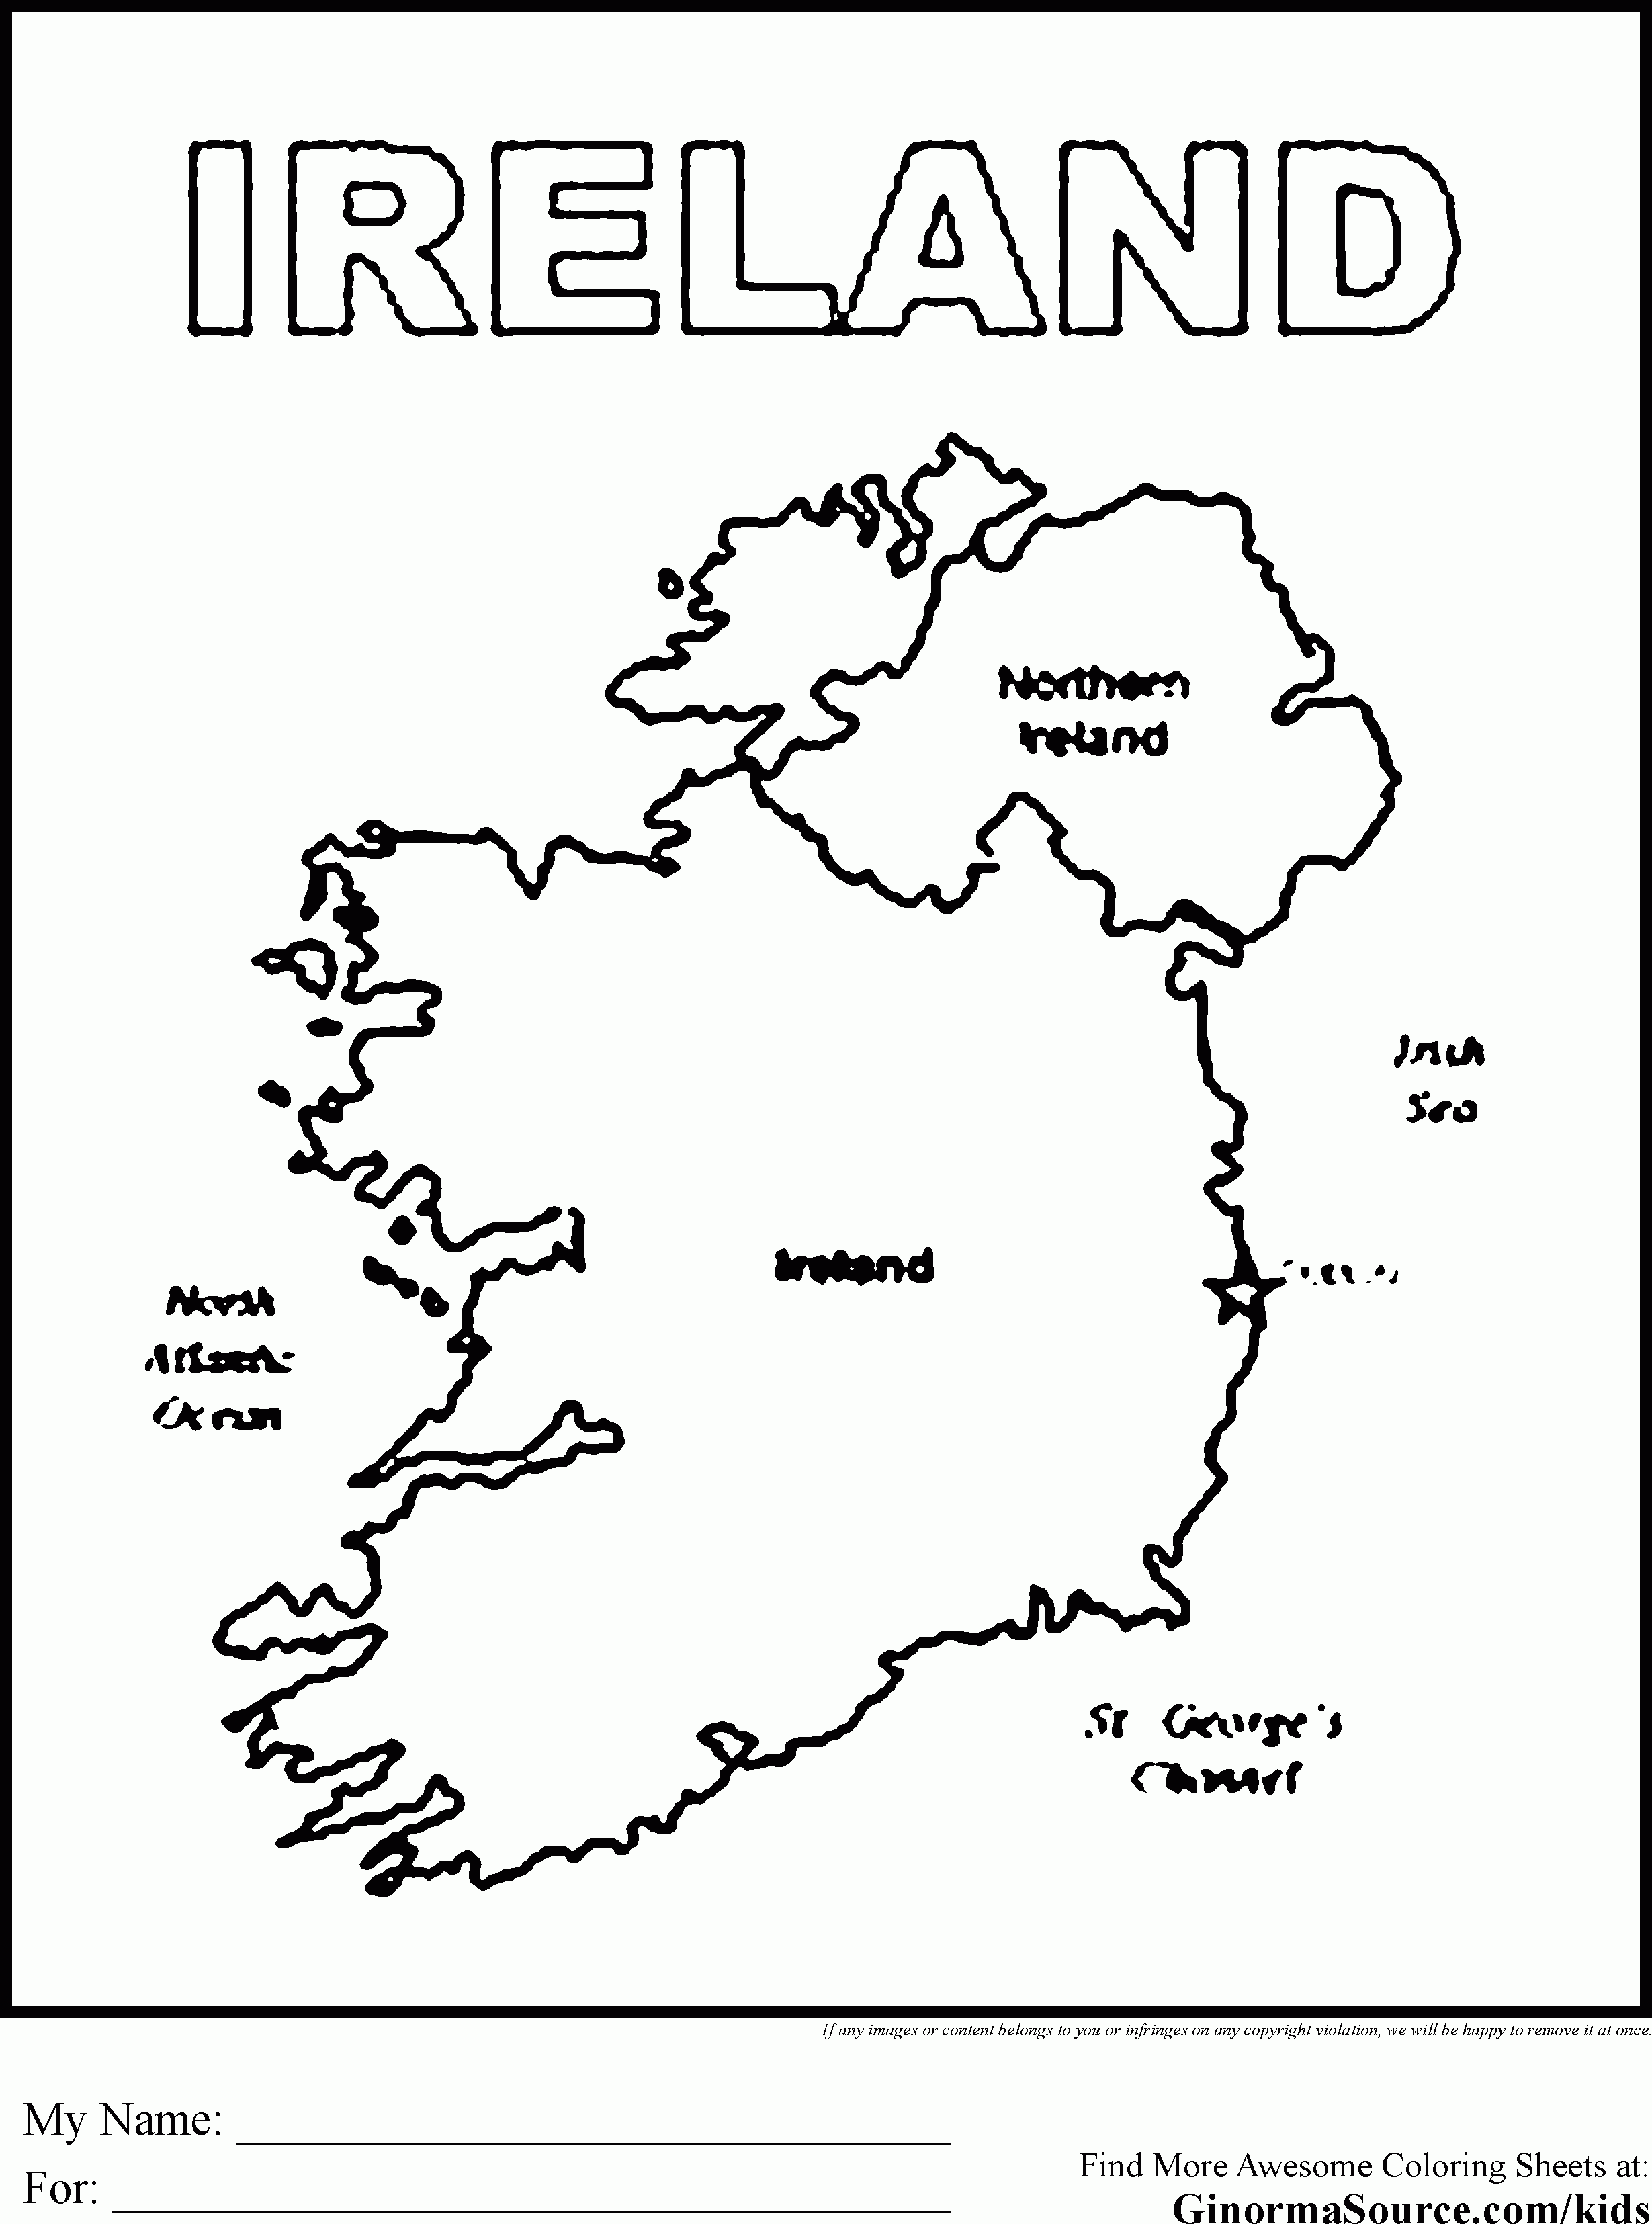 Map Of Ireland Coloring Page| Coloring Pages for Kids 